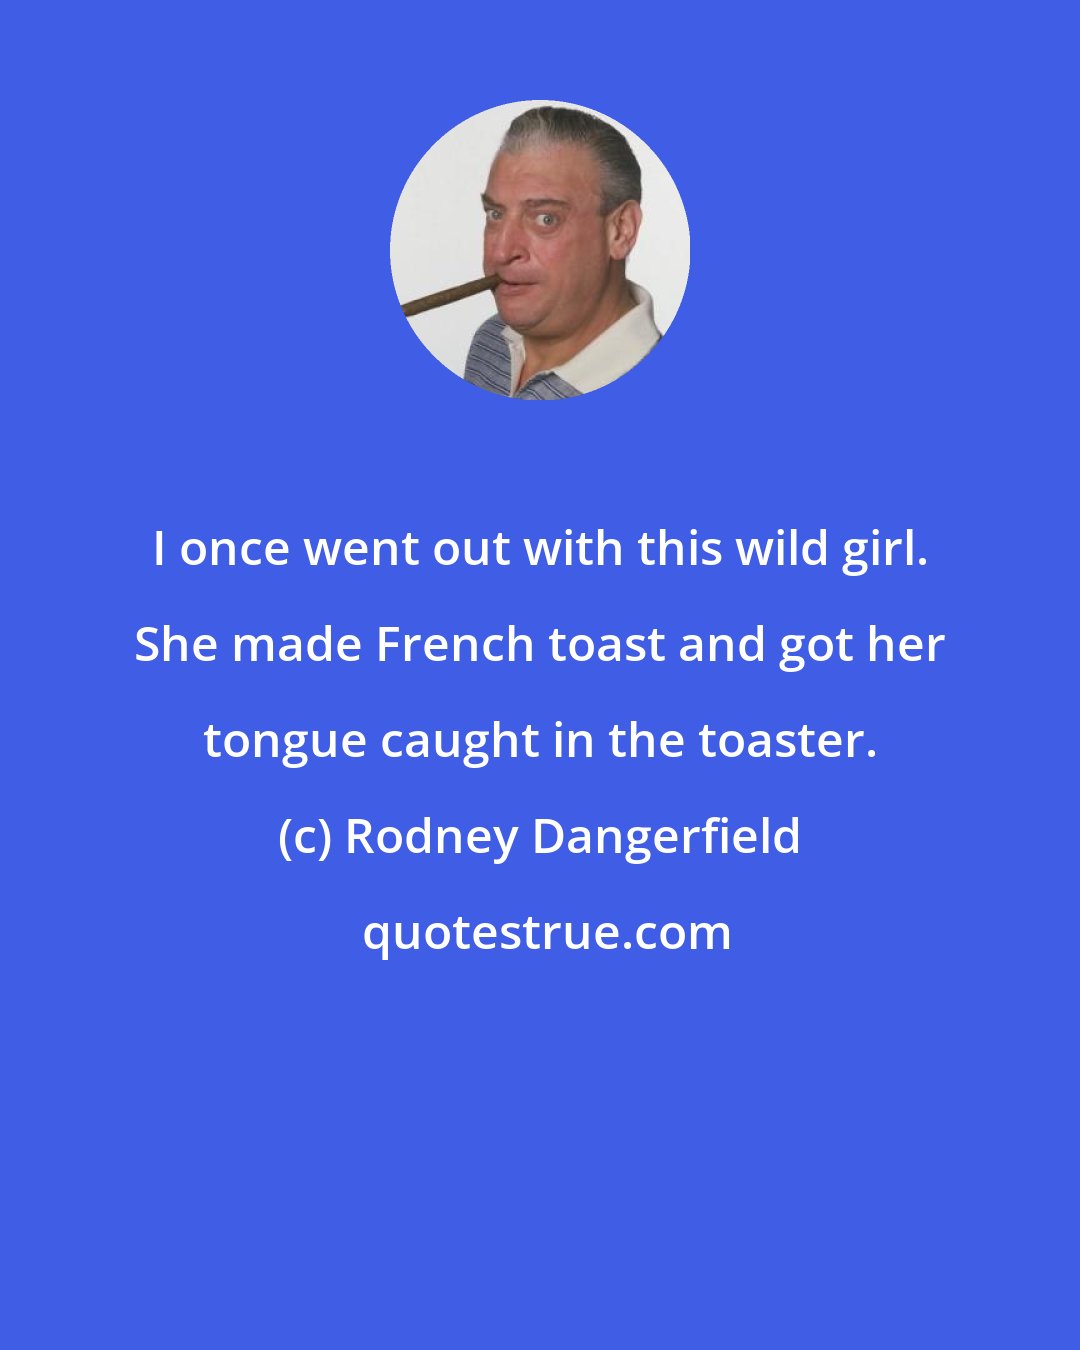 Rodney Dangerfield: I once went out with this wild girl. She made French toast and got her tongue caught in the toaster.